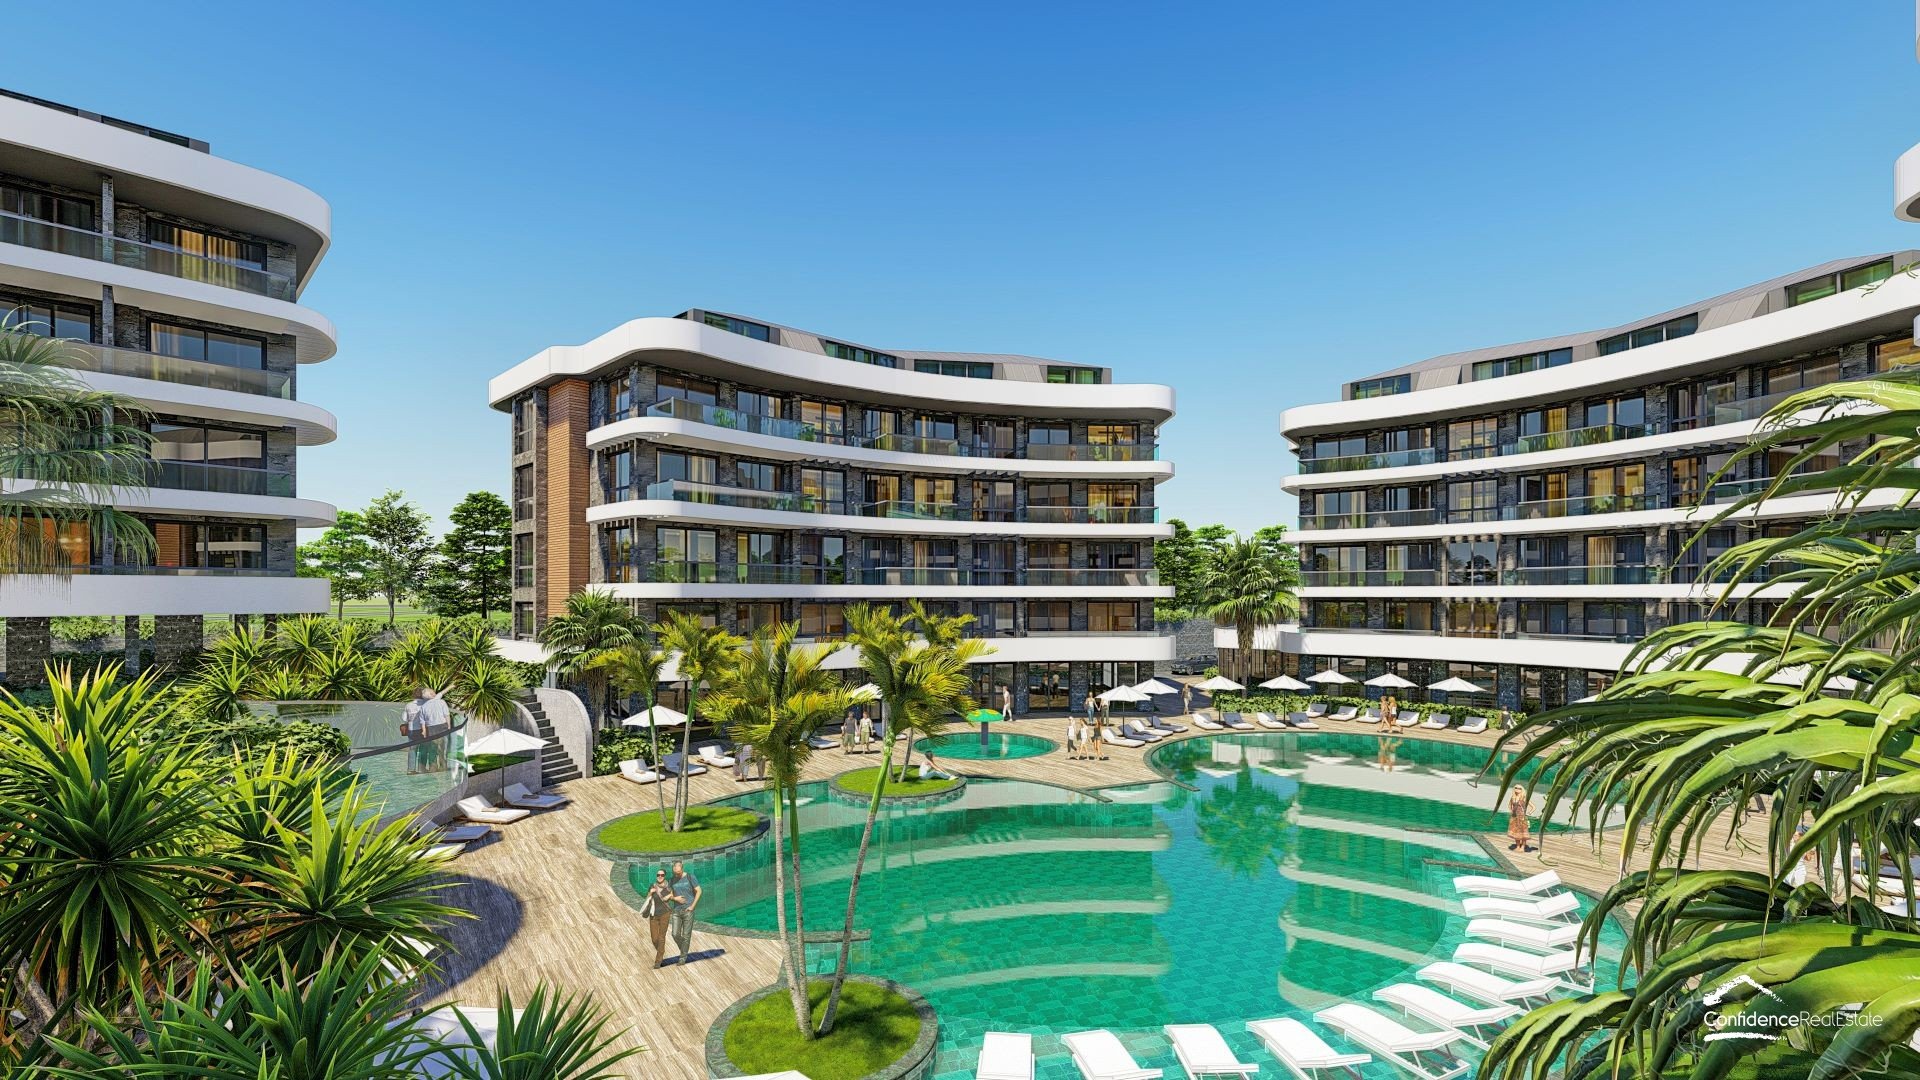 A new comfort-class investment project in one of the most popular districts of Alanya